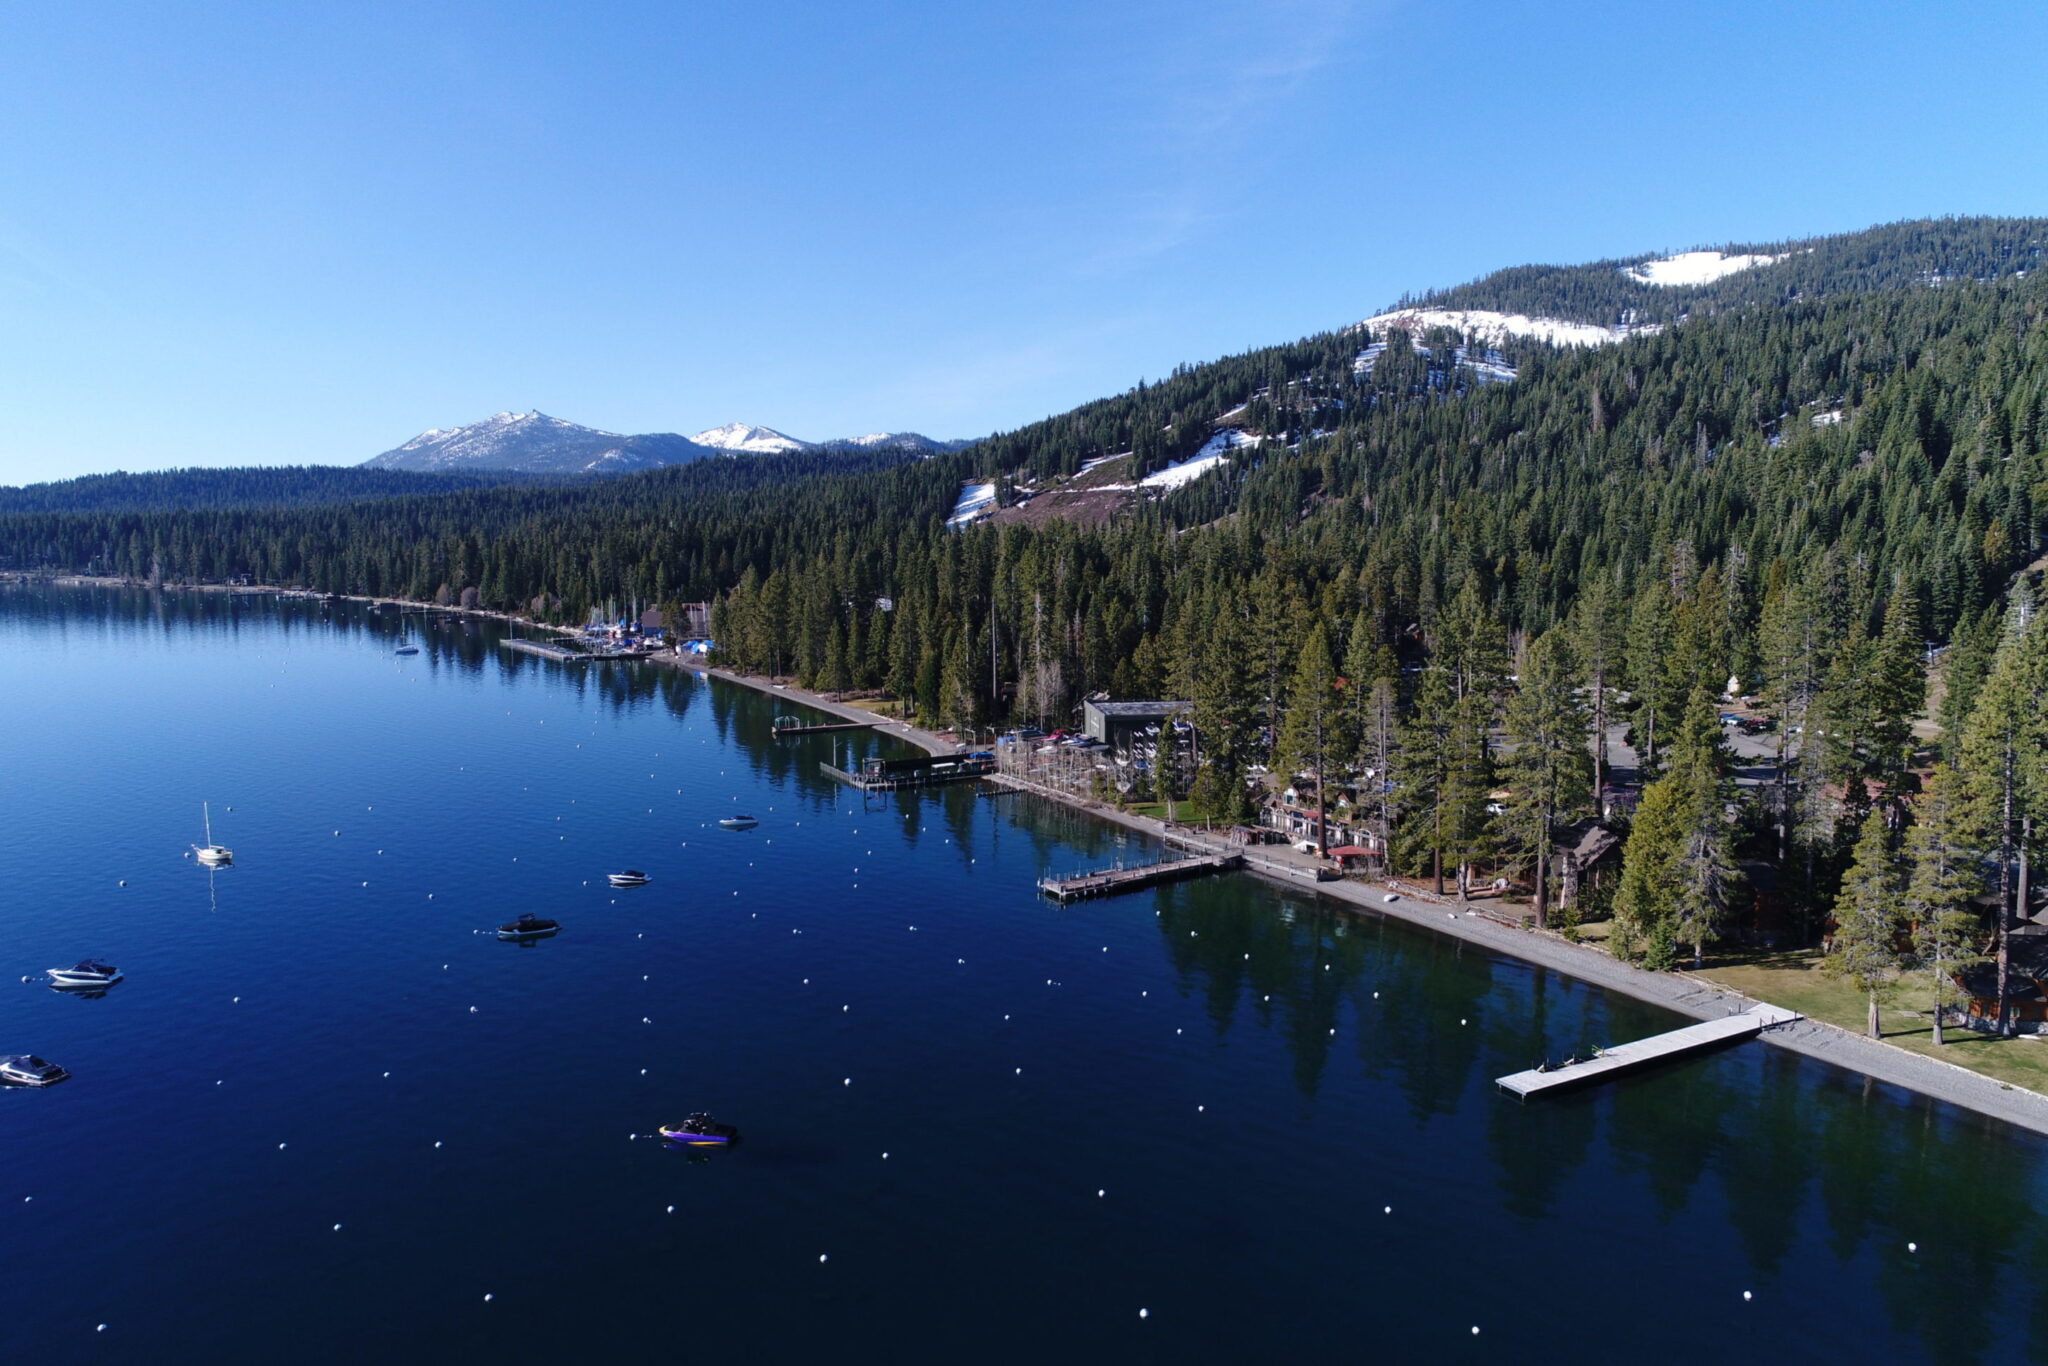 Spring Lakeside View of the West Shore of Lake Tahoe